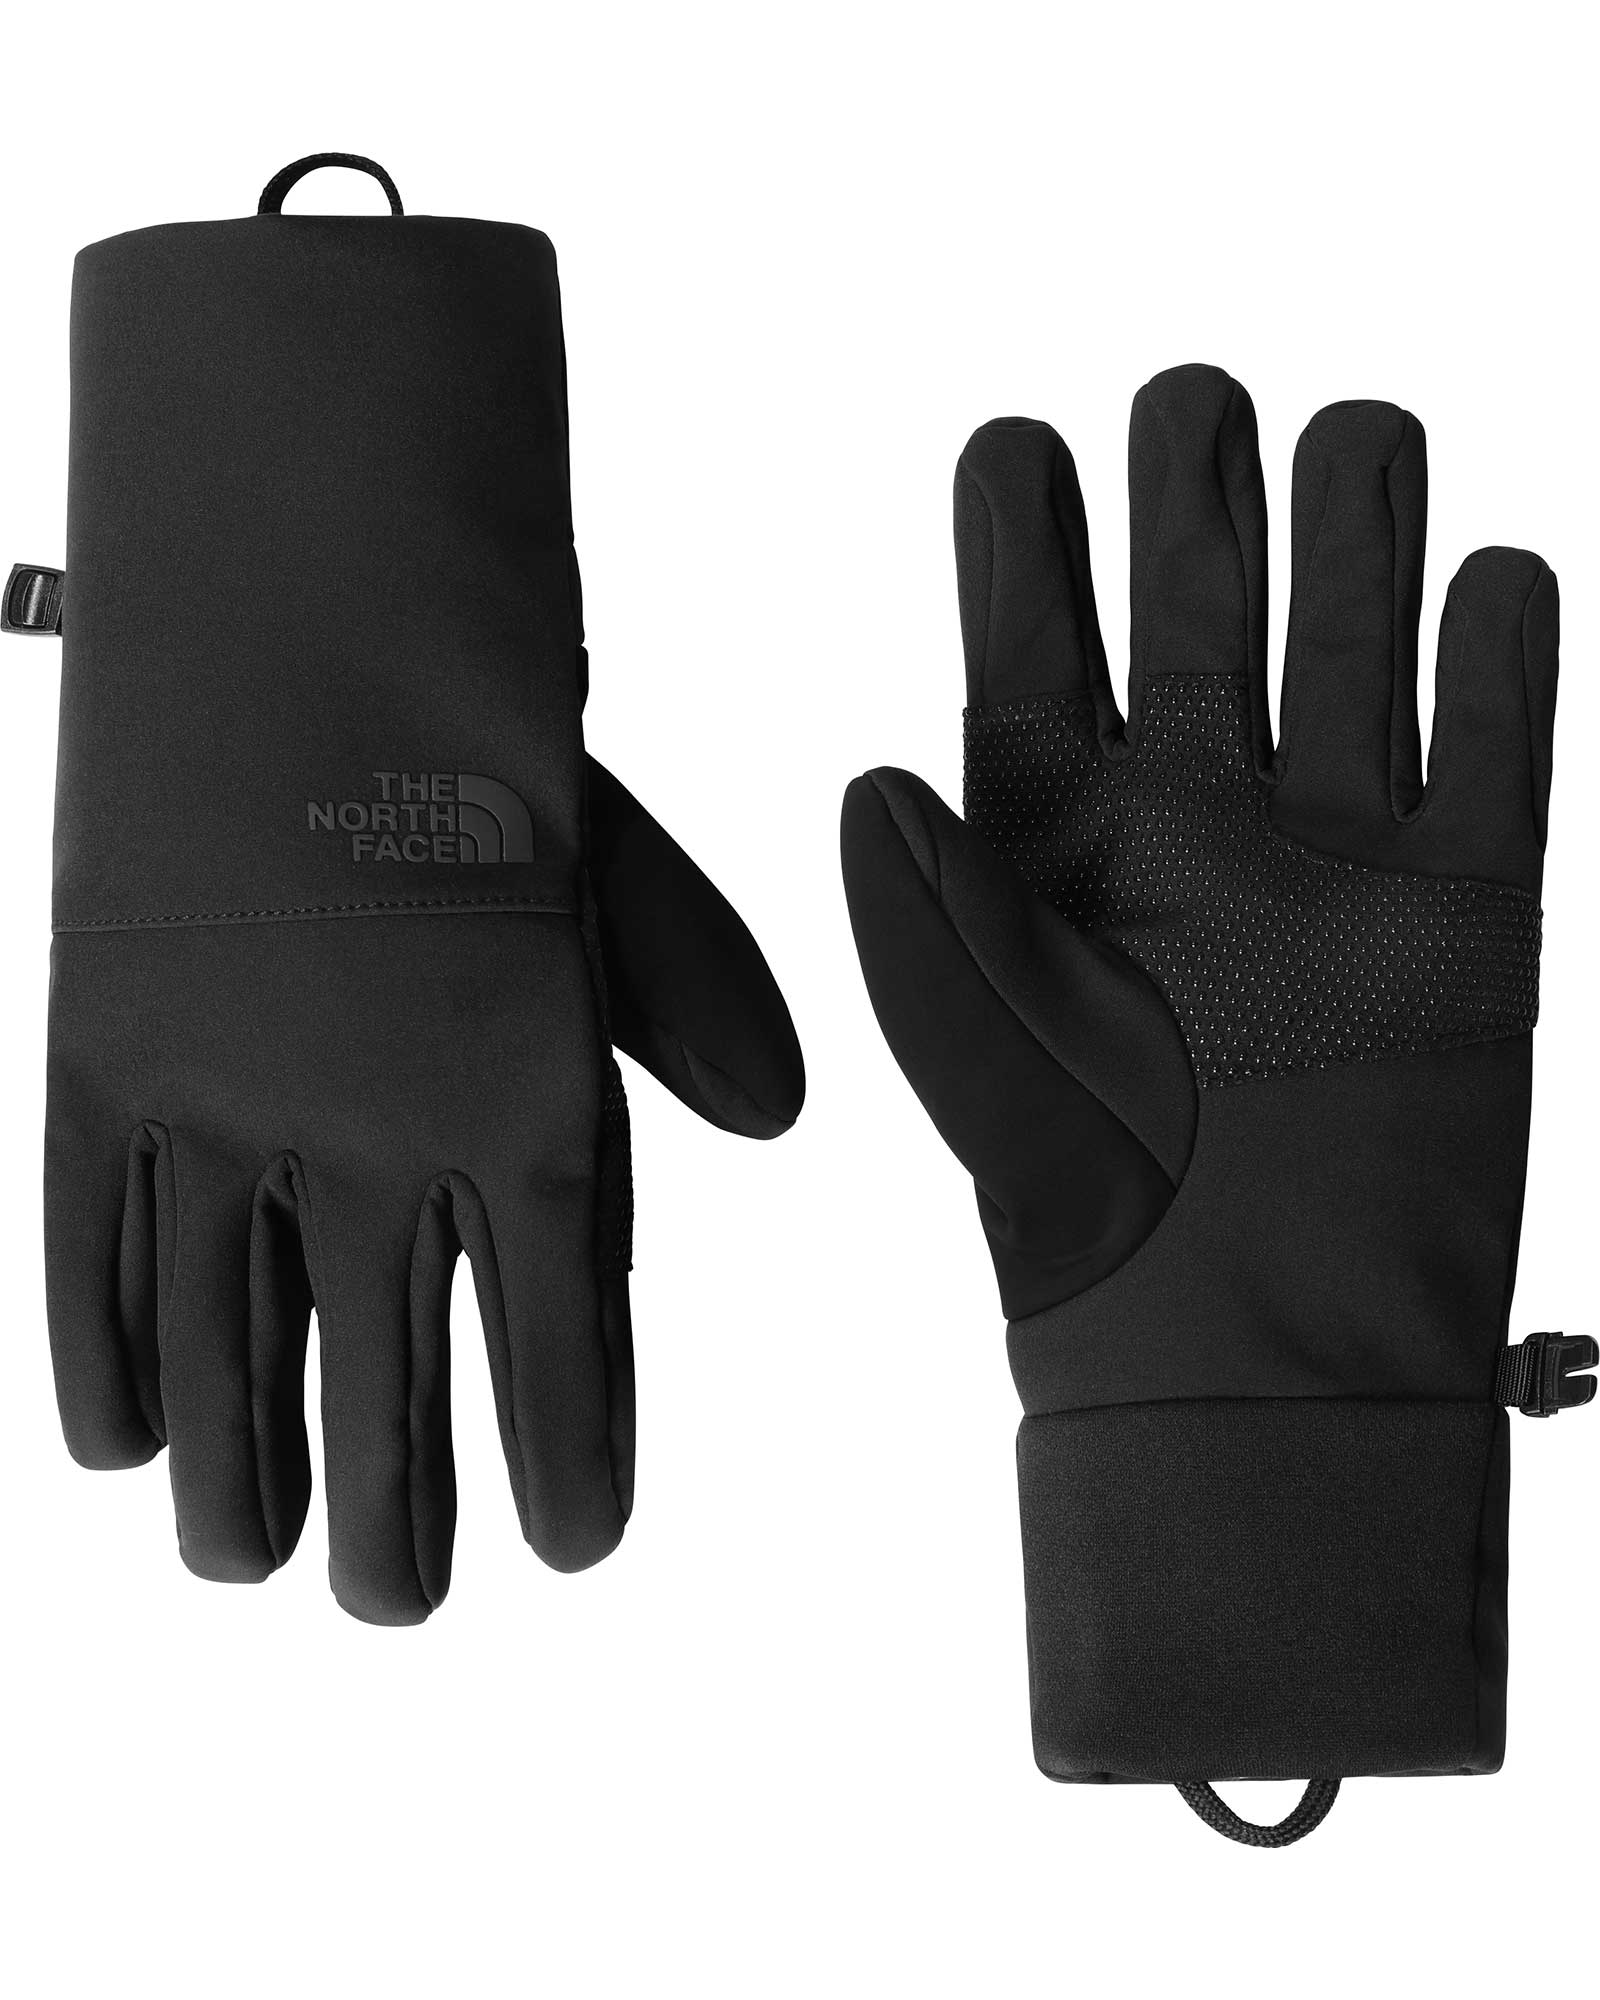 The North Face Apex Insulated Etip Men’s Gloves - TNF Black L